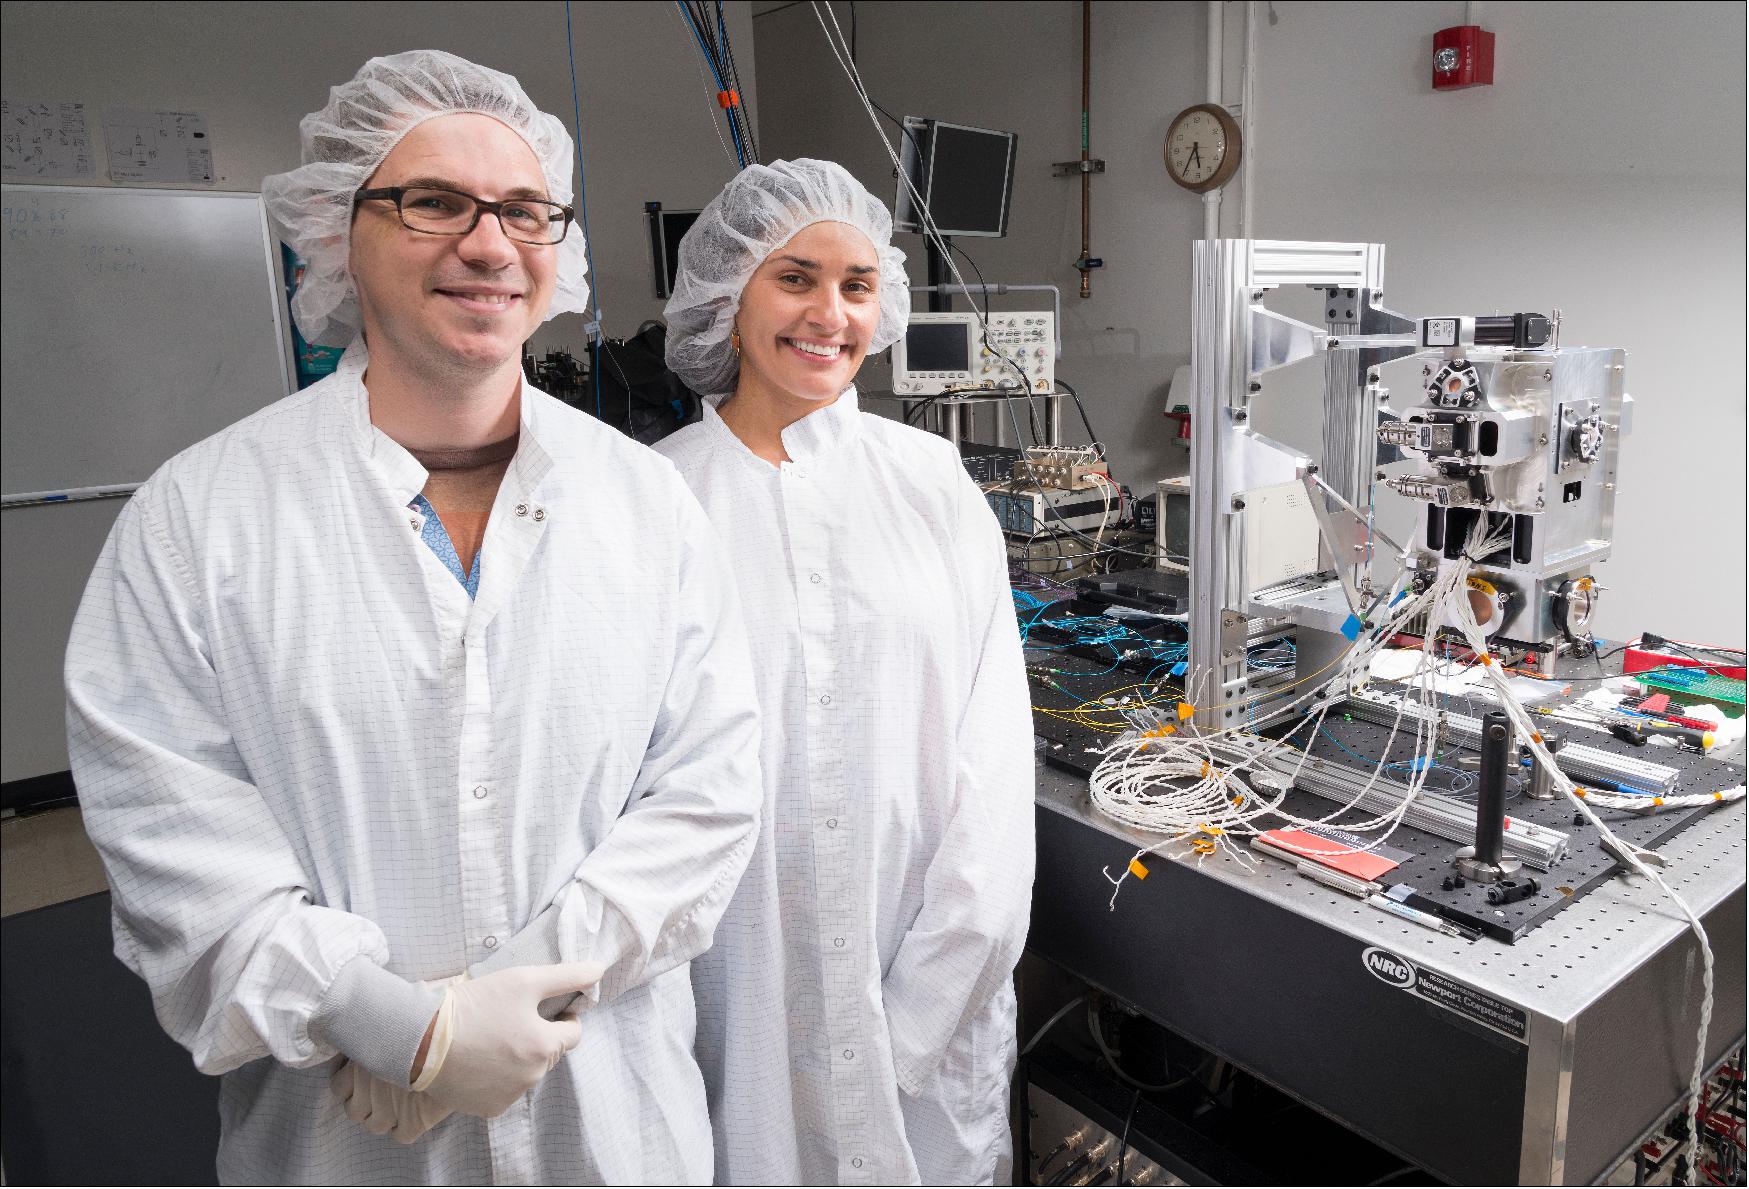 Figure 1: JPL's David Aveline and Anita Sengupta are seen with the physics package for the Cold Atom Laboratory, which includes a vacuum chamber where ultra-cold quantum gases are made (image credit: NASA/JPL-Caltech)